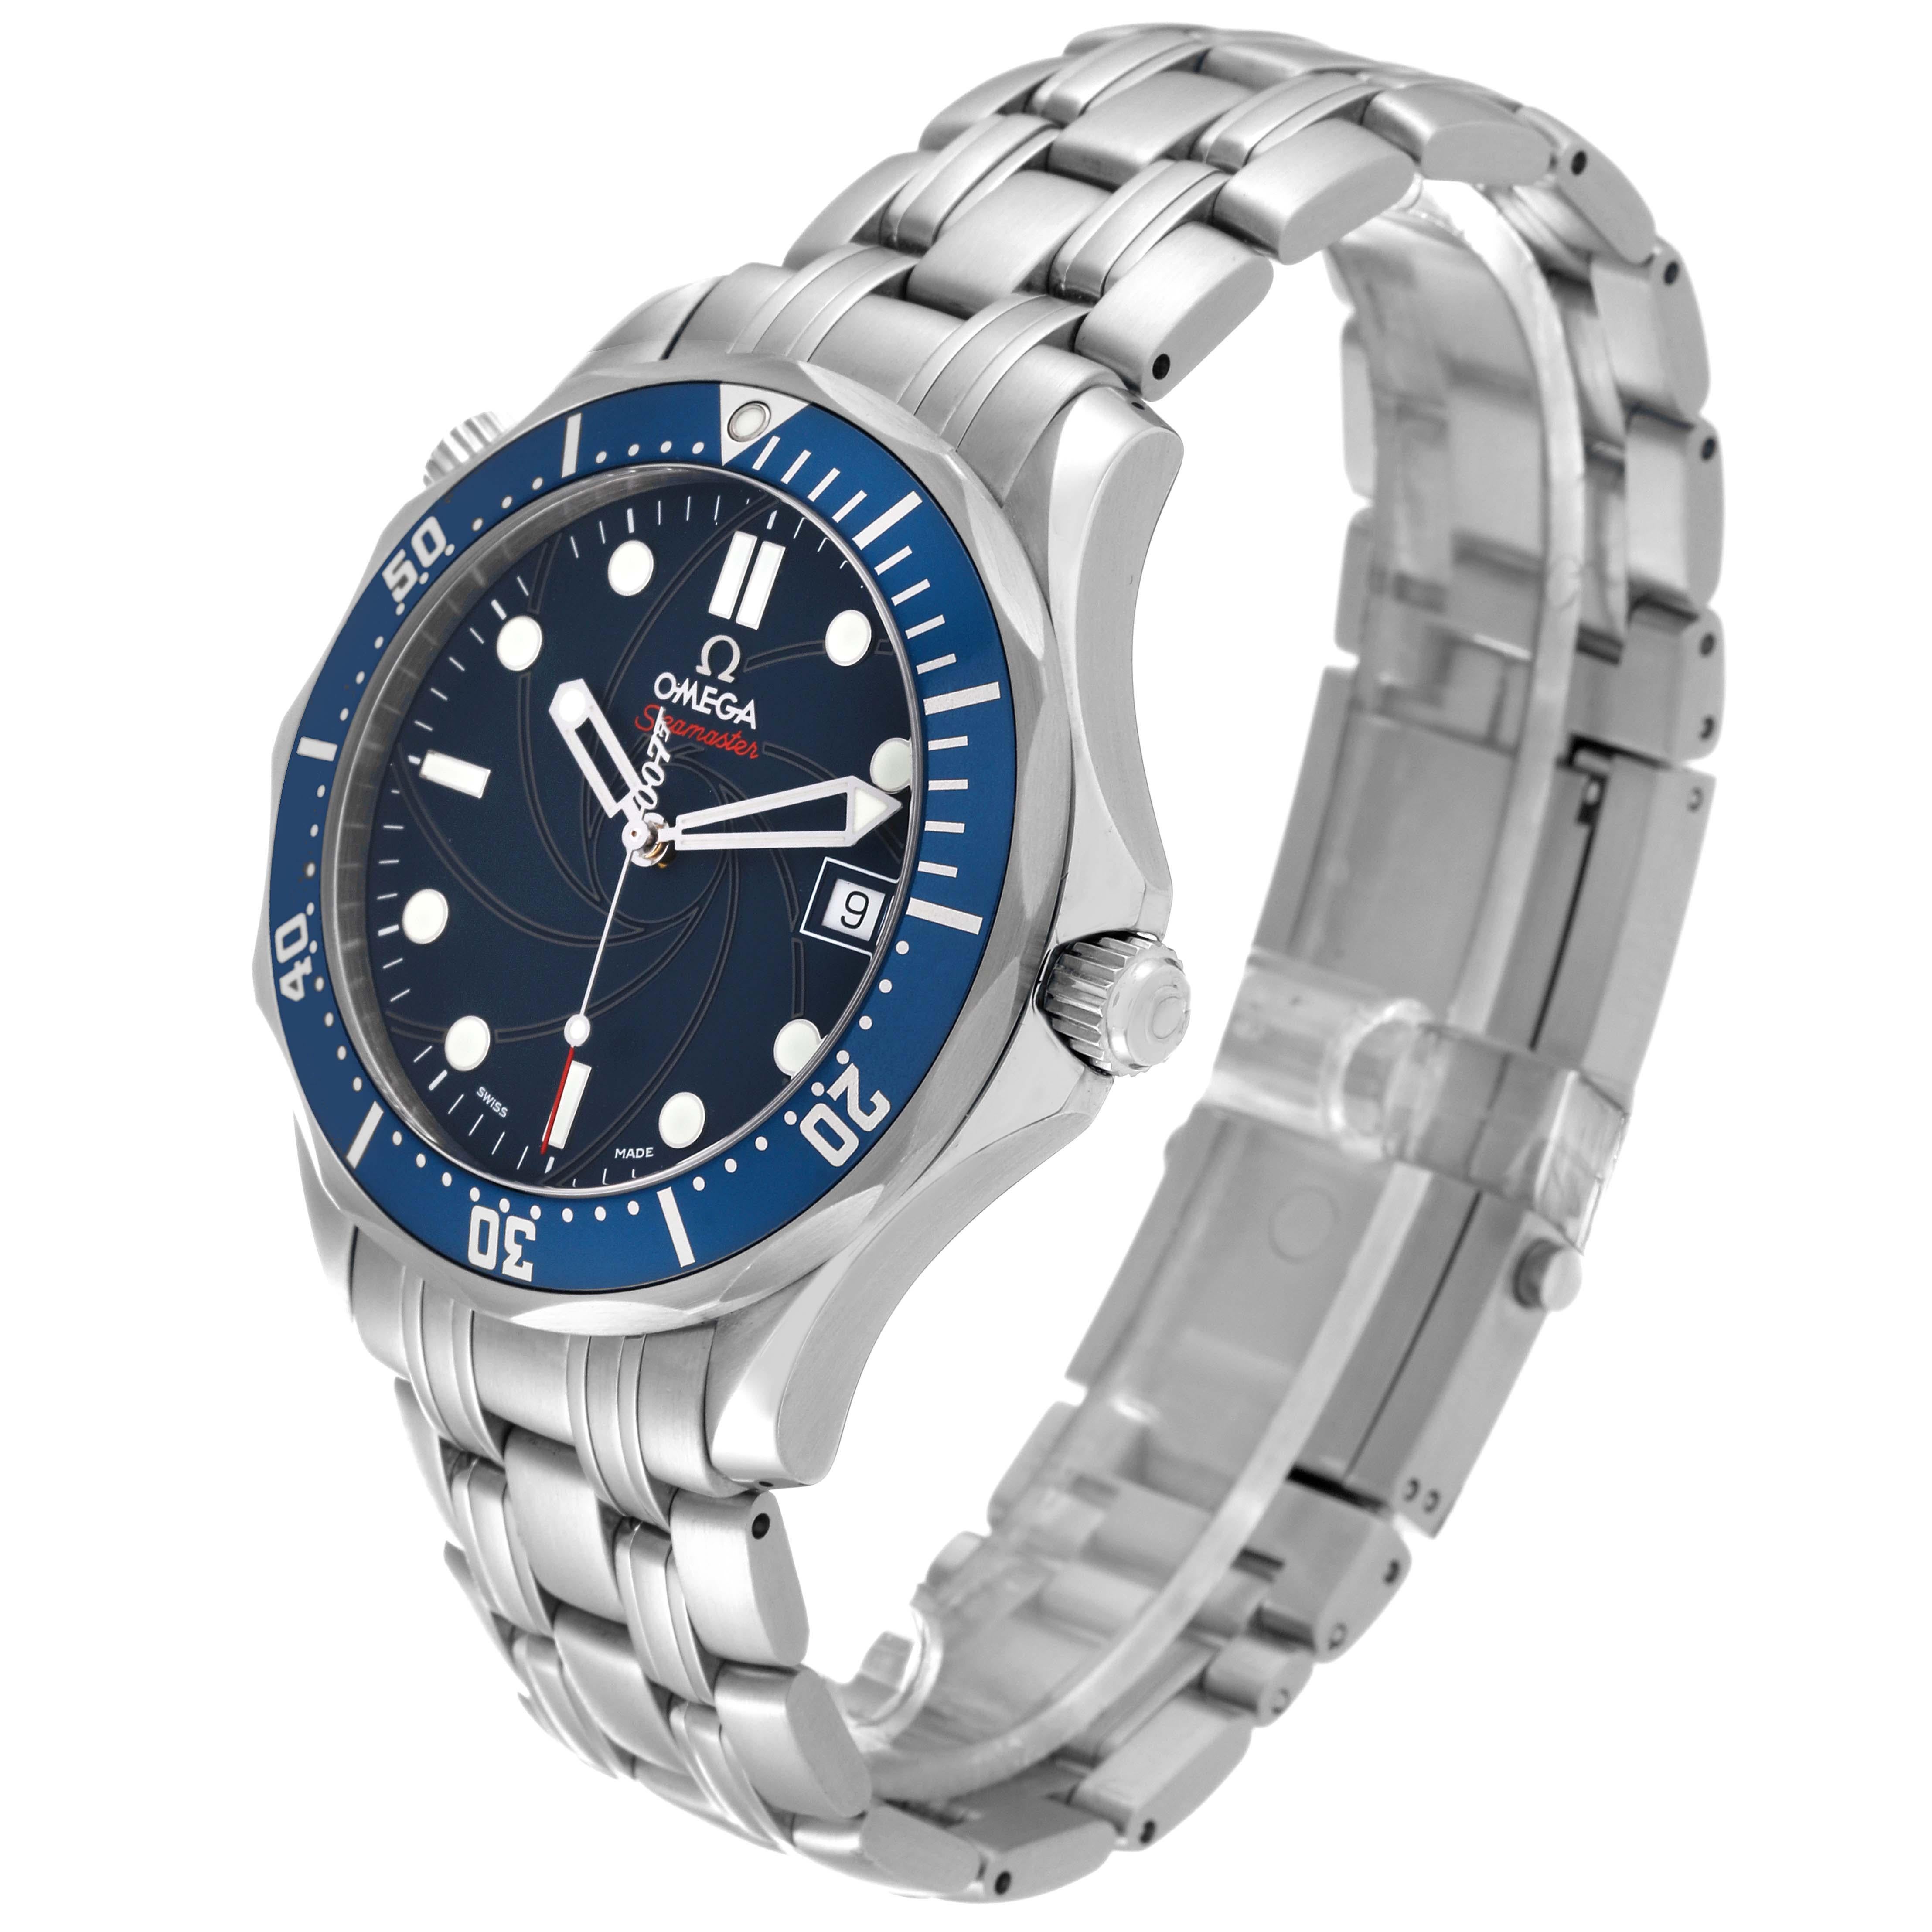 Men's Omega Seamaster Bond 007 Limited Edition Steel Mens Watch 2226.80.00 Box Card For Sale